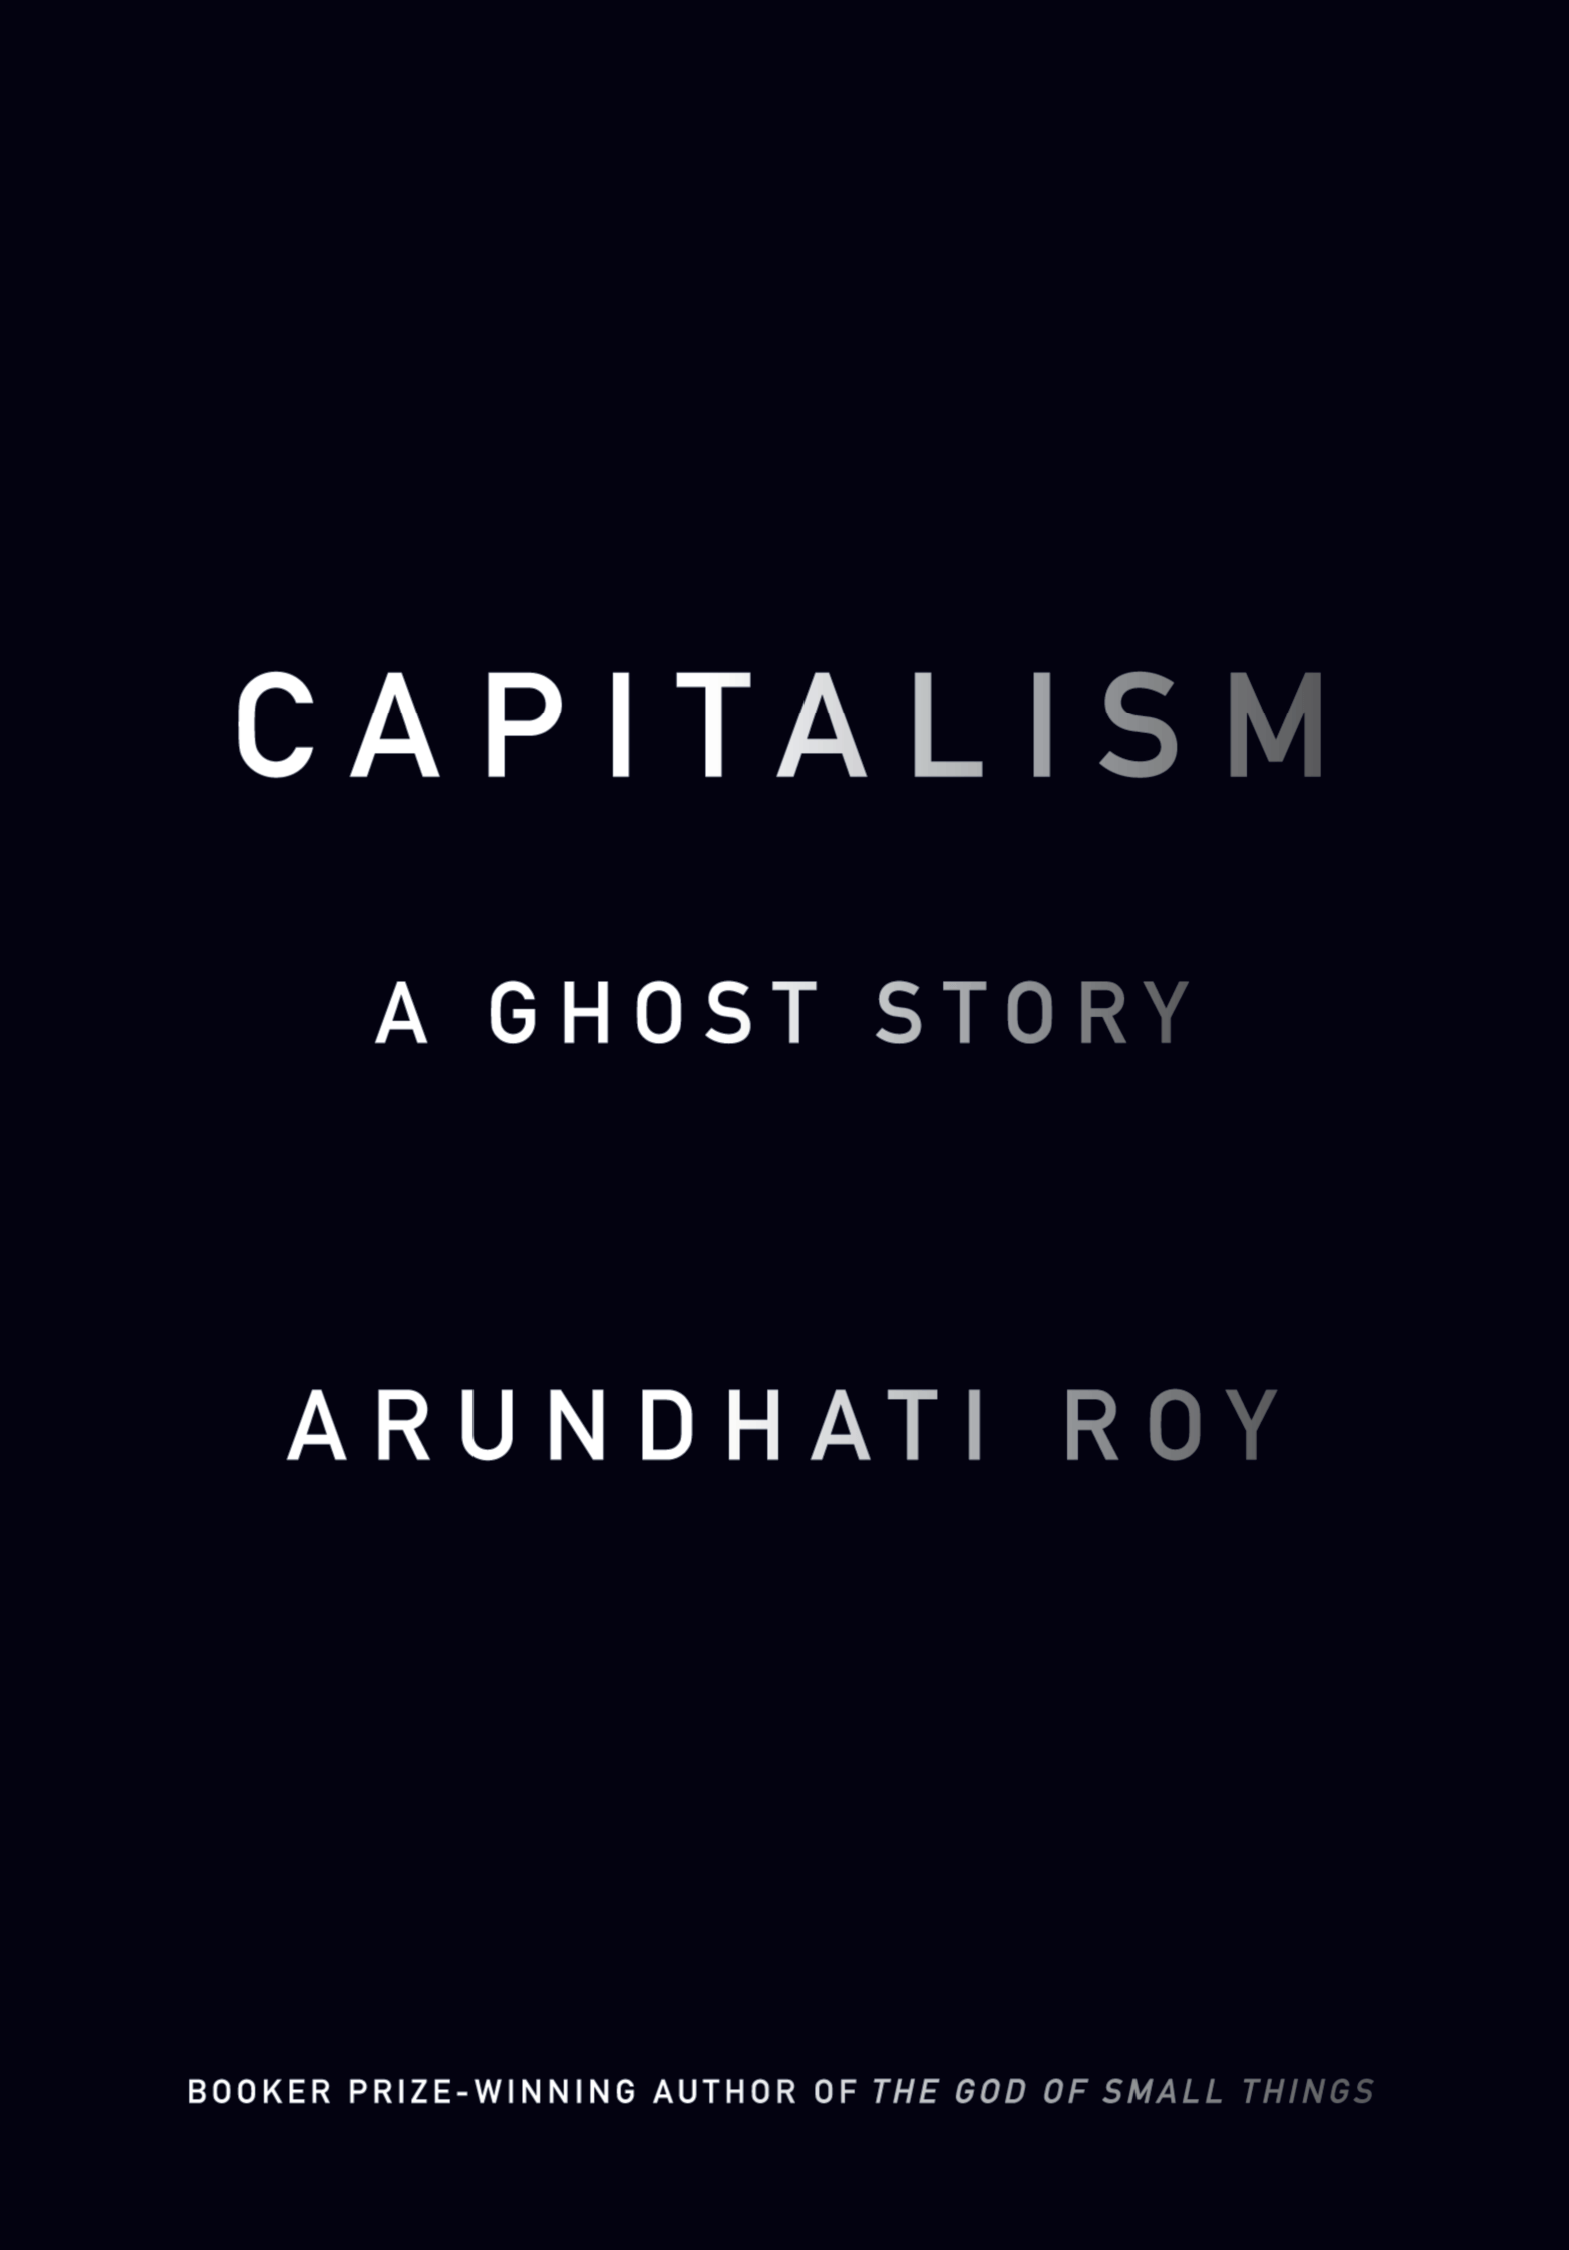 Cover Photo of the book Capitalism A Ghost Story